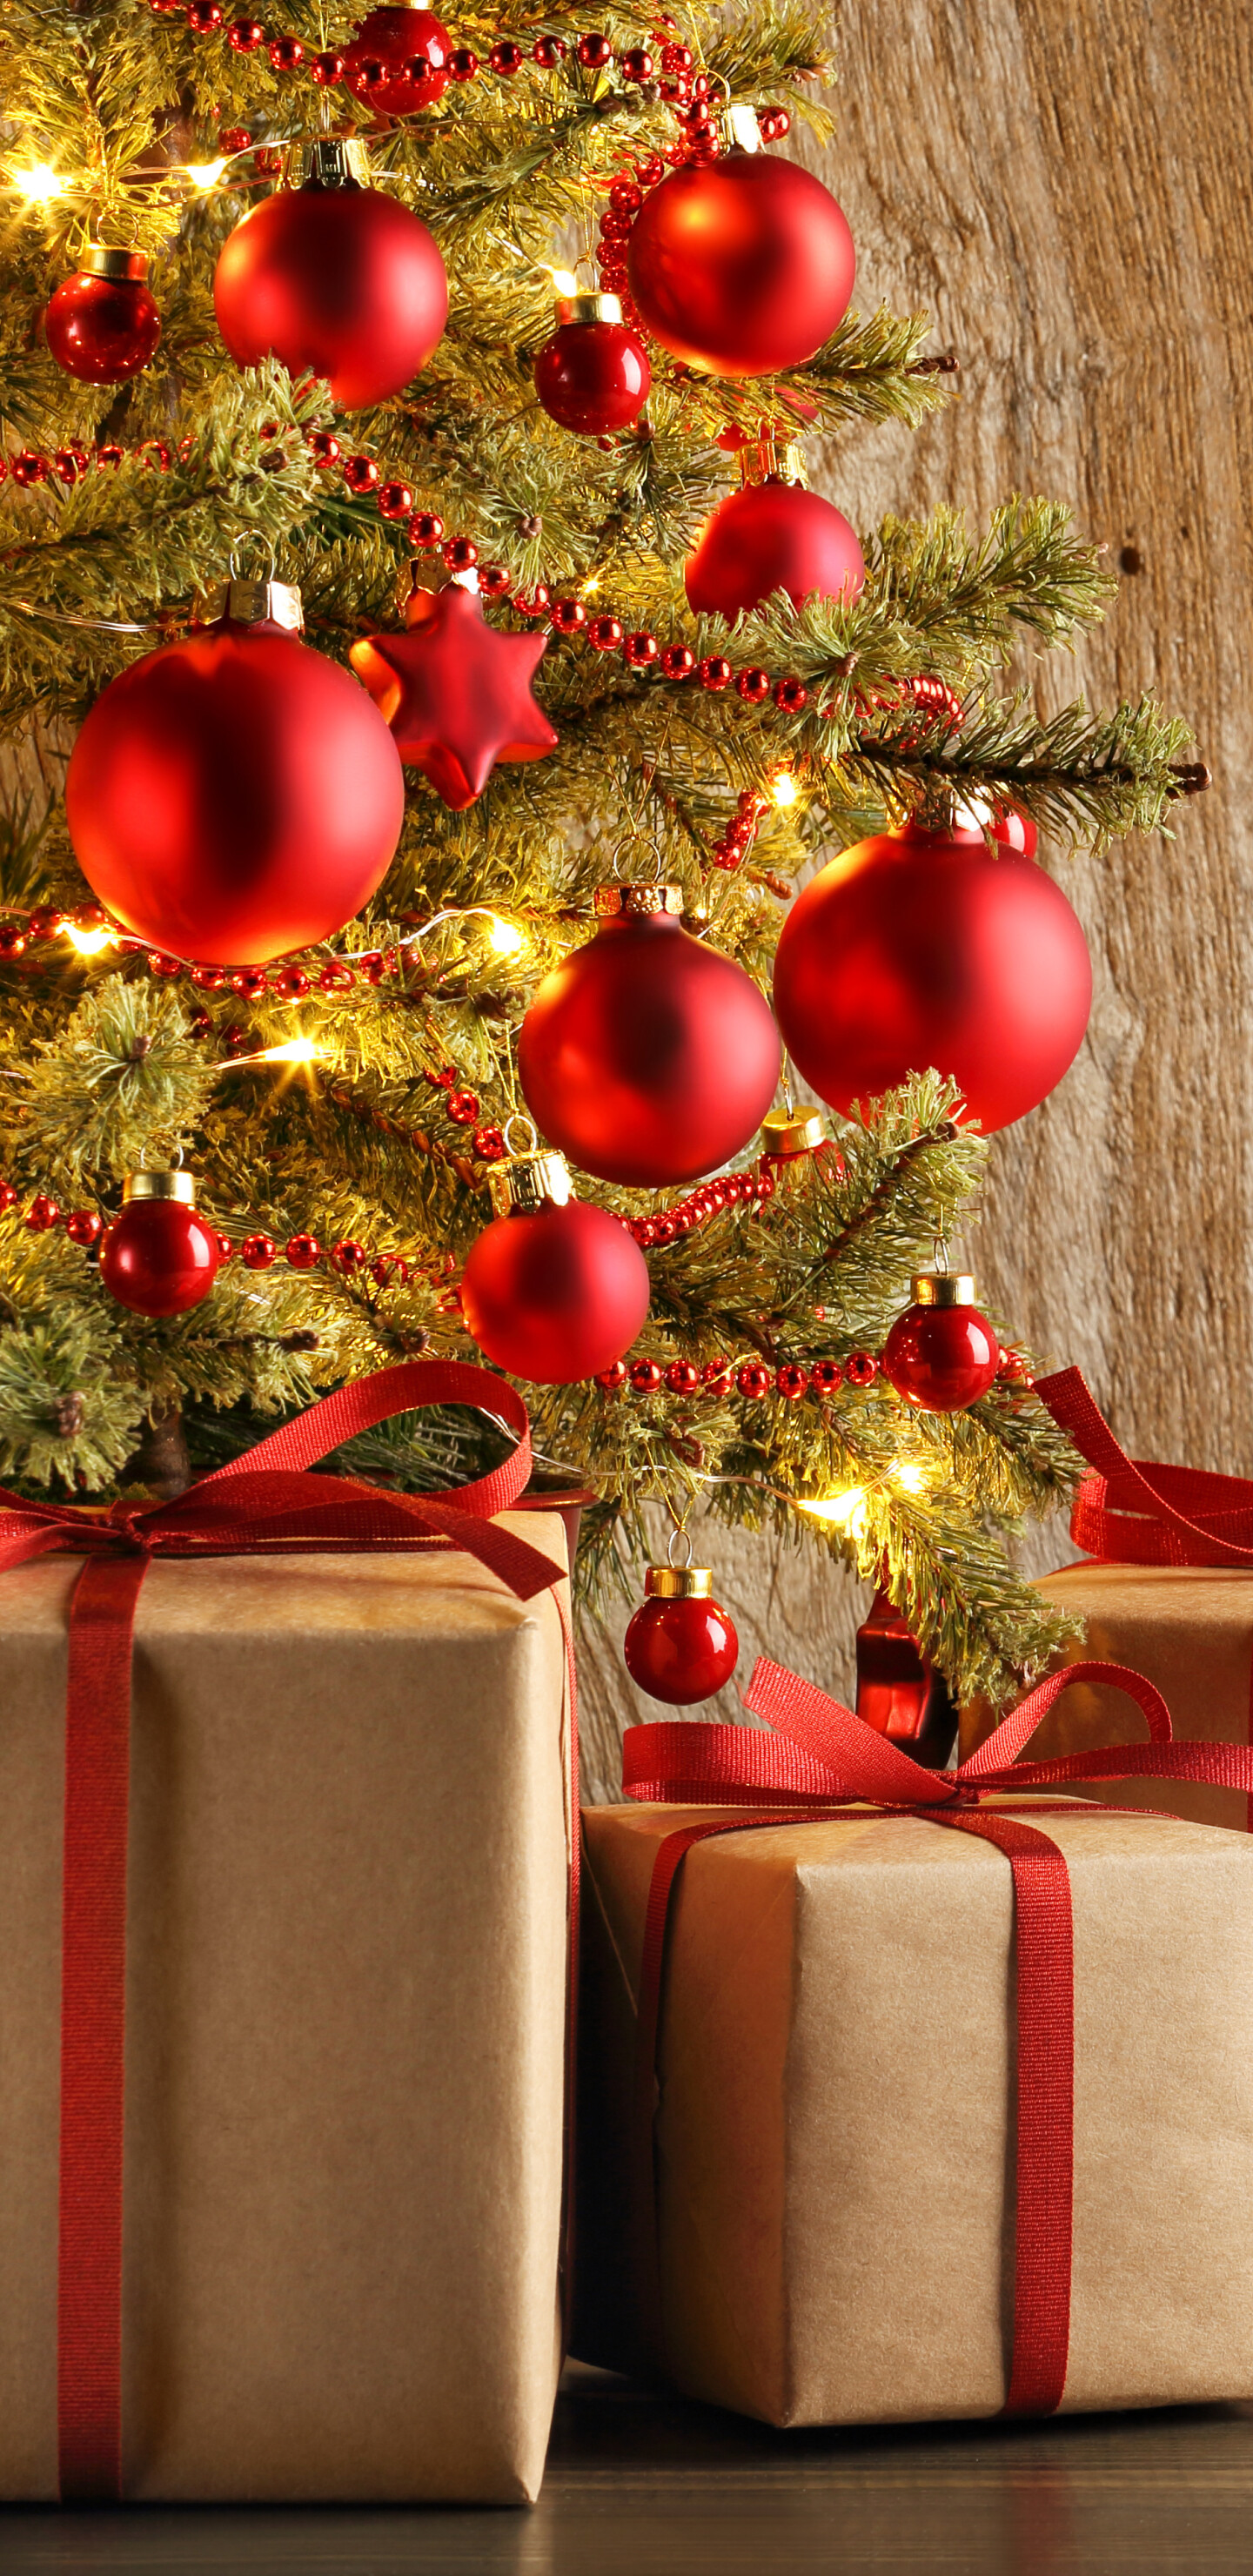 Christmas Ornament: Holiday, Presents, Decorations. 1440x2960 HD Background.